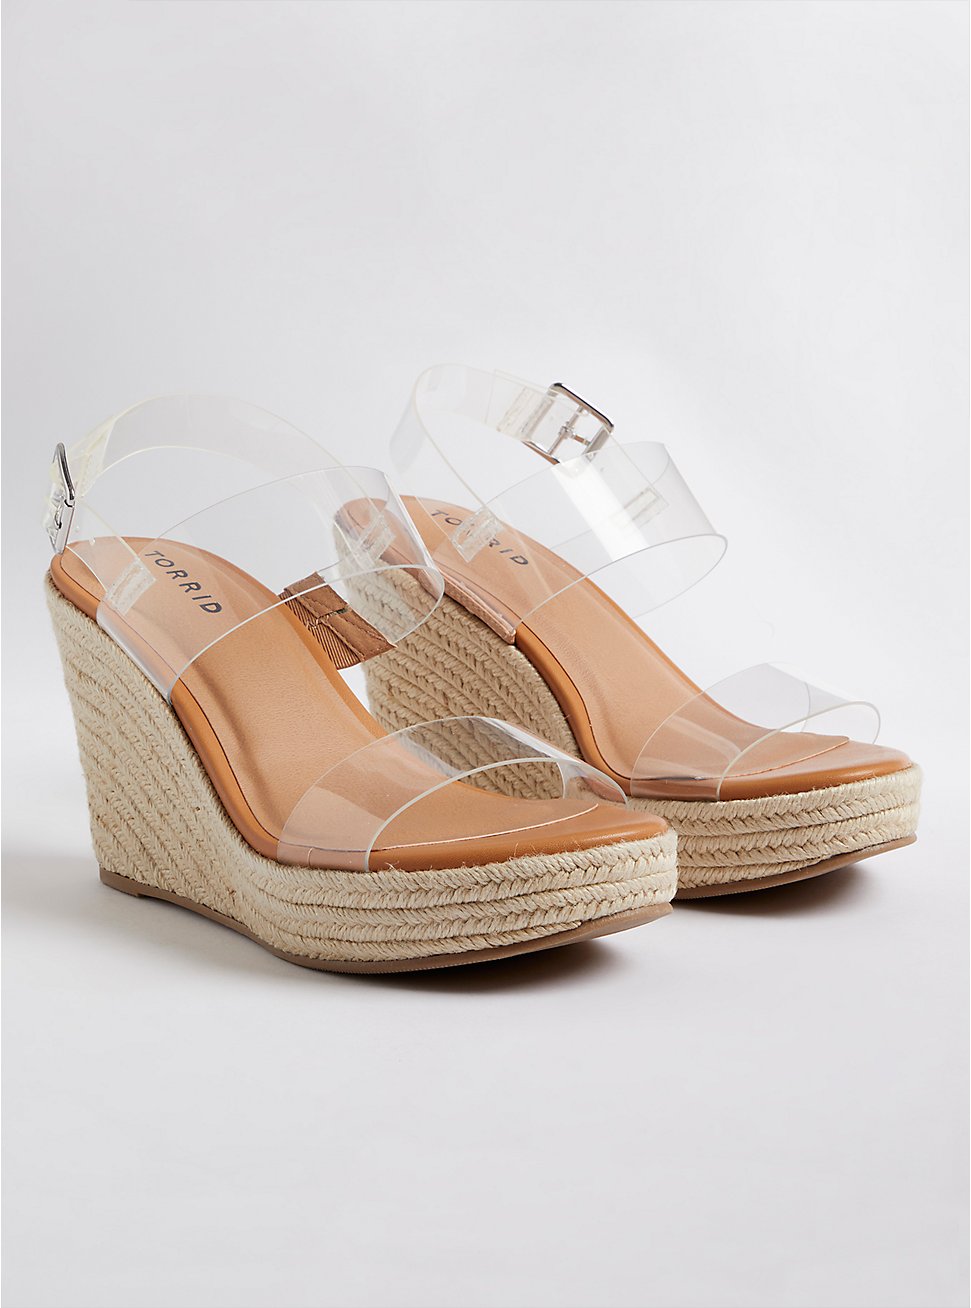 PVC Double Strap Wedge - Clear (WW), CLEAR, hi-res